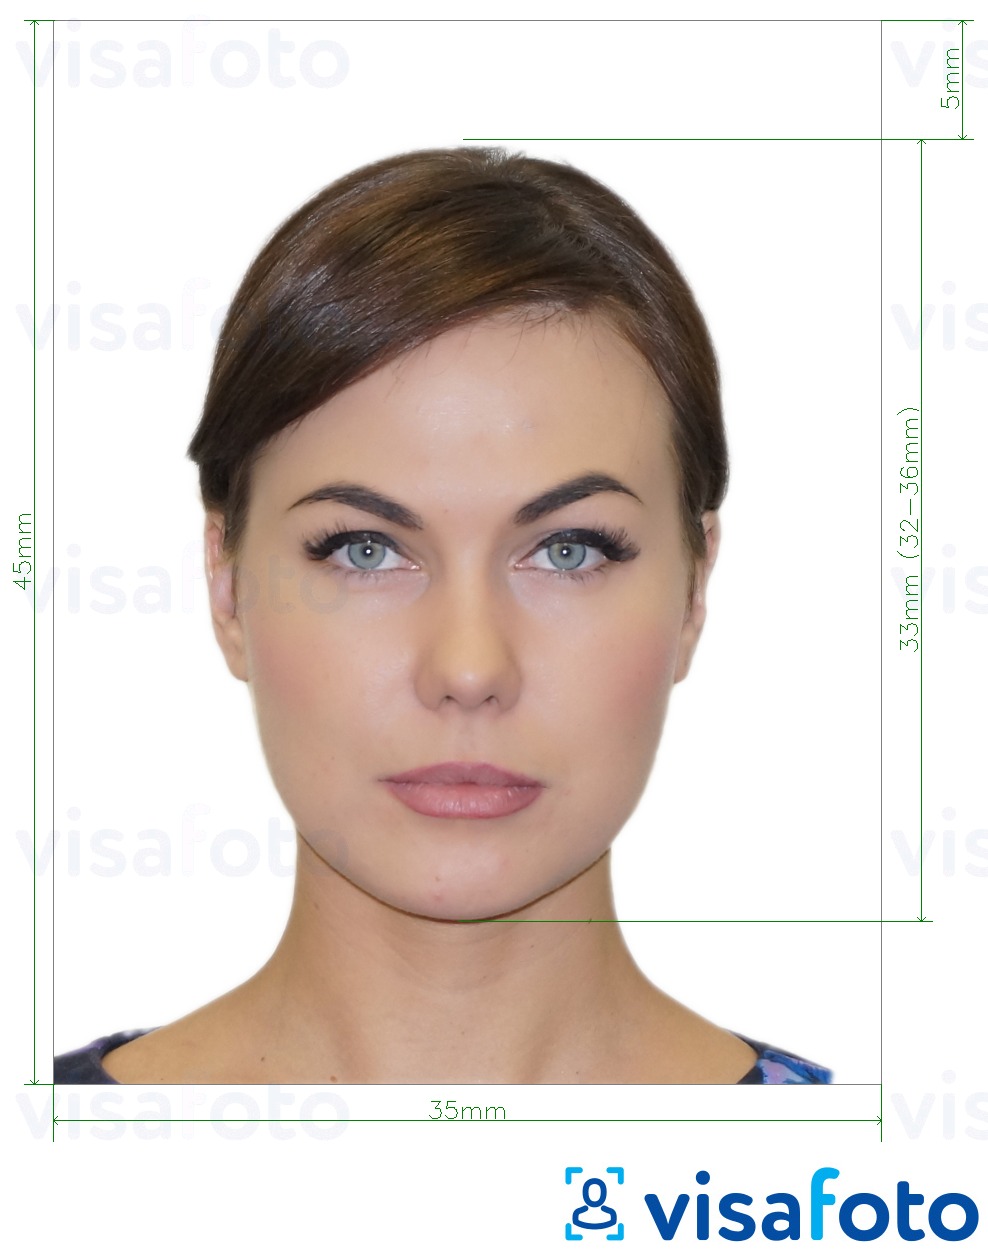 Example of photo for Russia International Passport Gosuslugi.ru, 35x45 mm with exact size specification